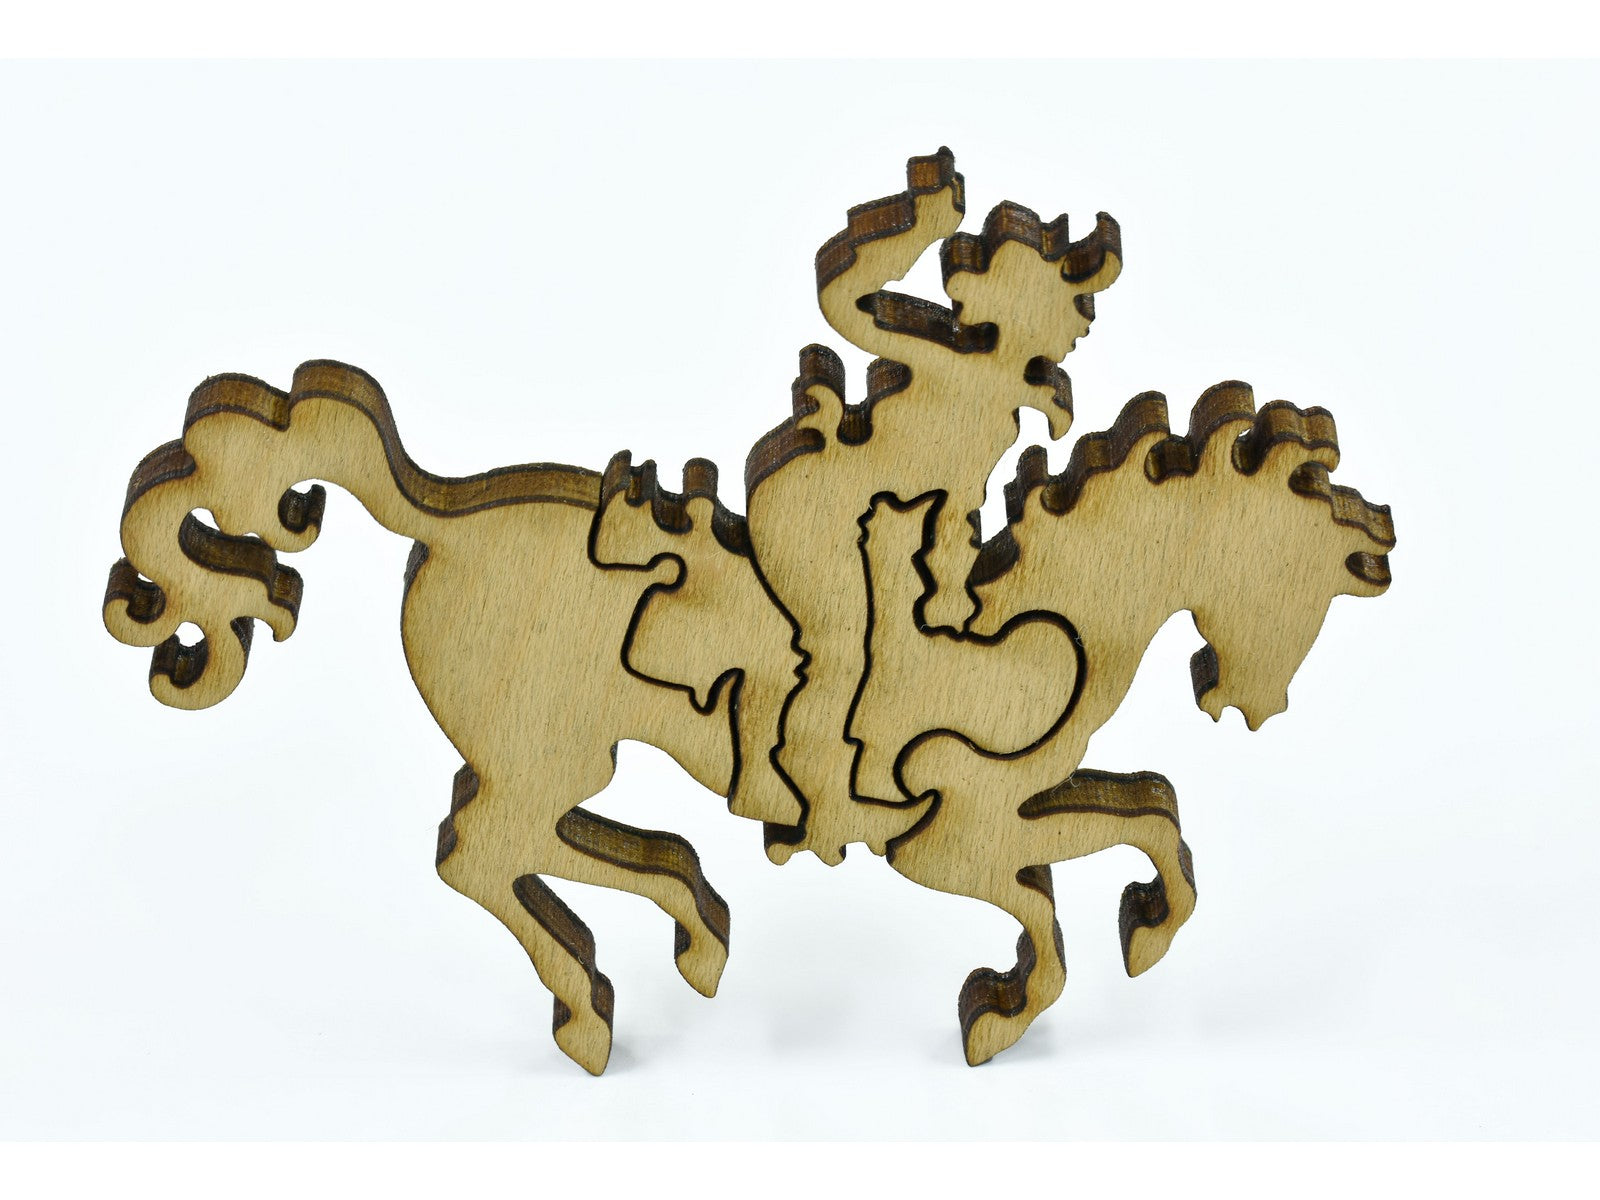 A closeup of pieces in the shape of person riding a horse.